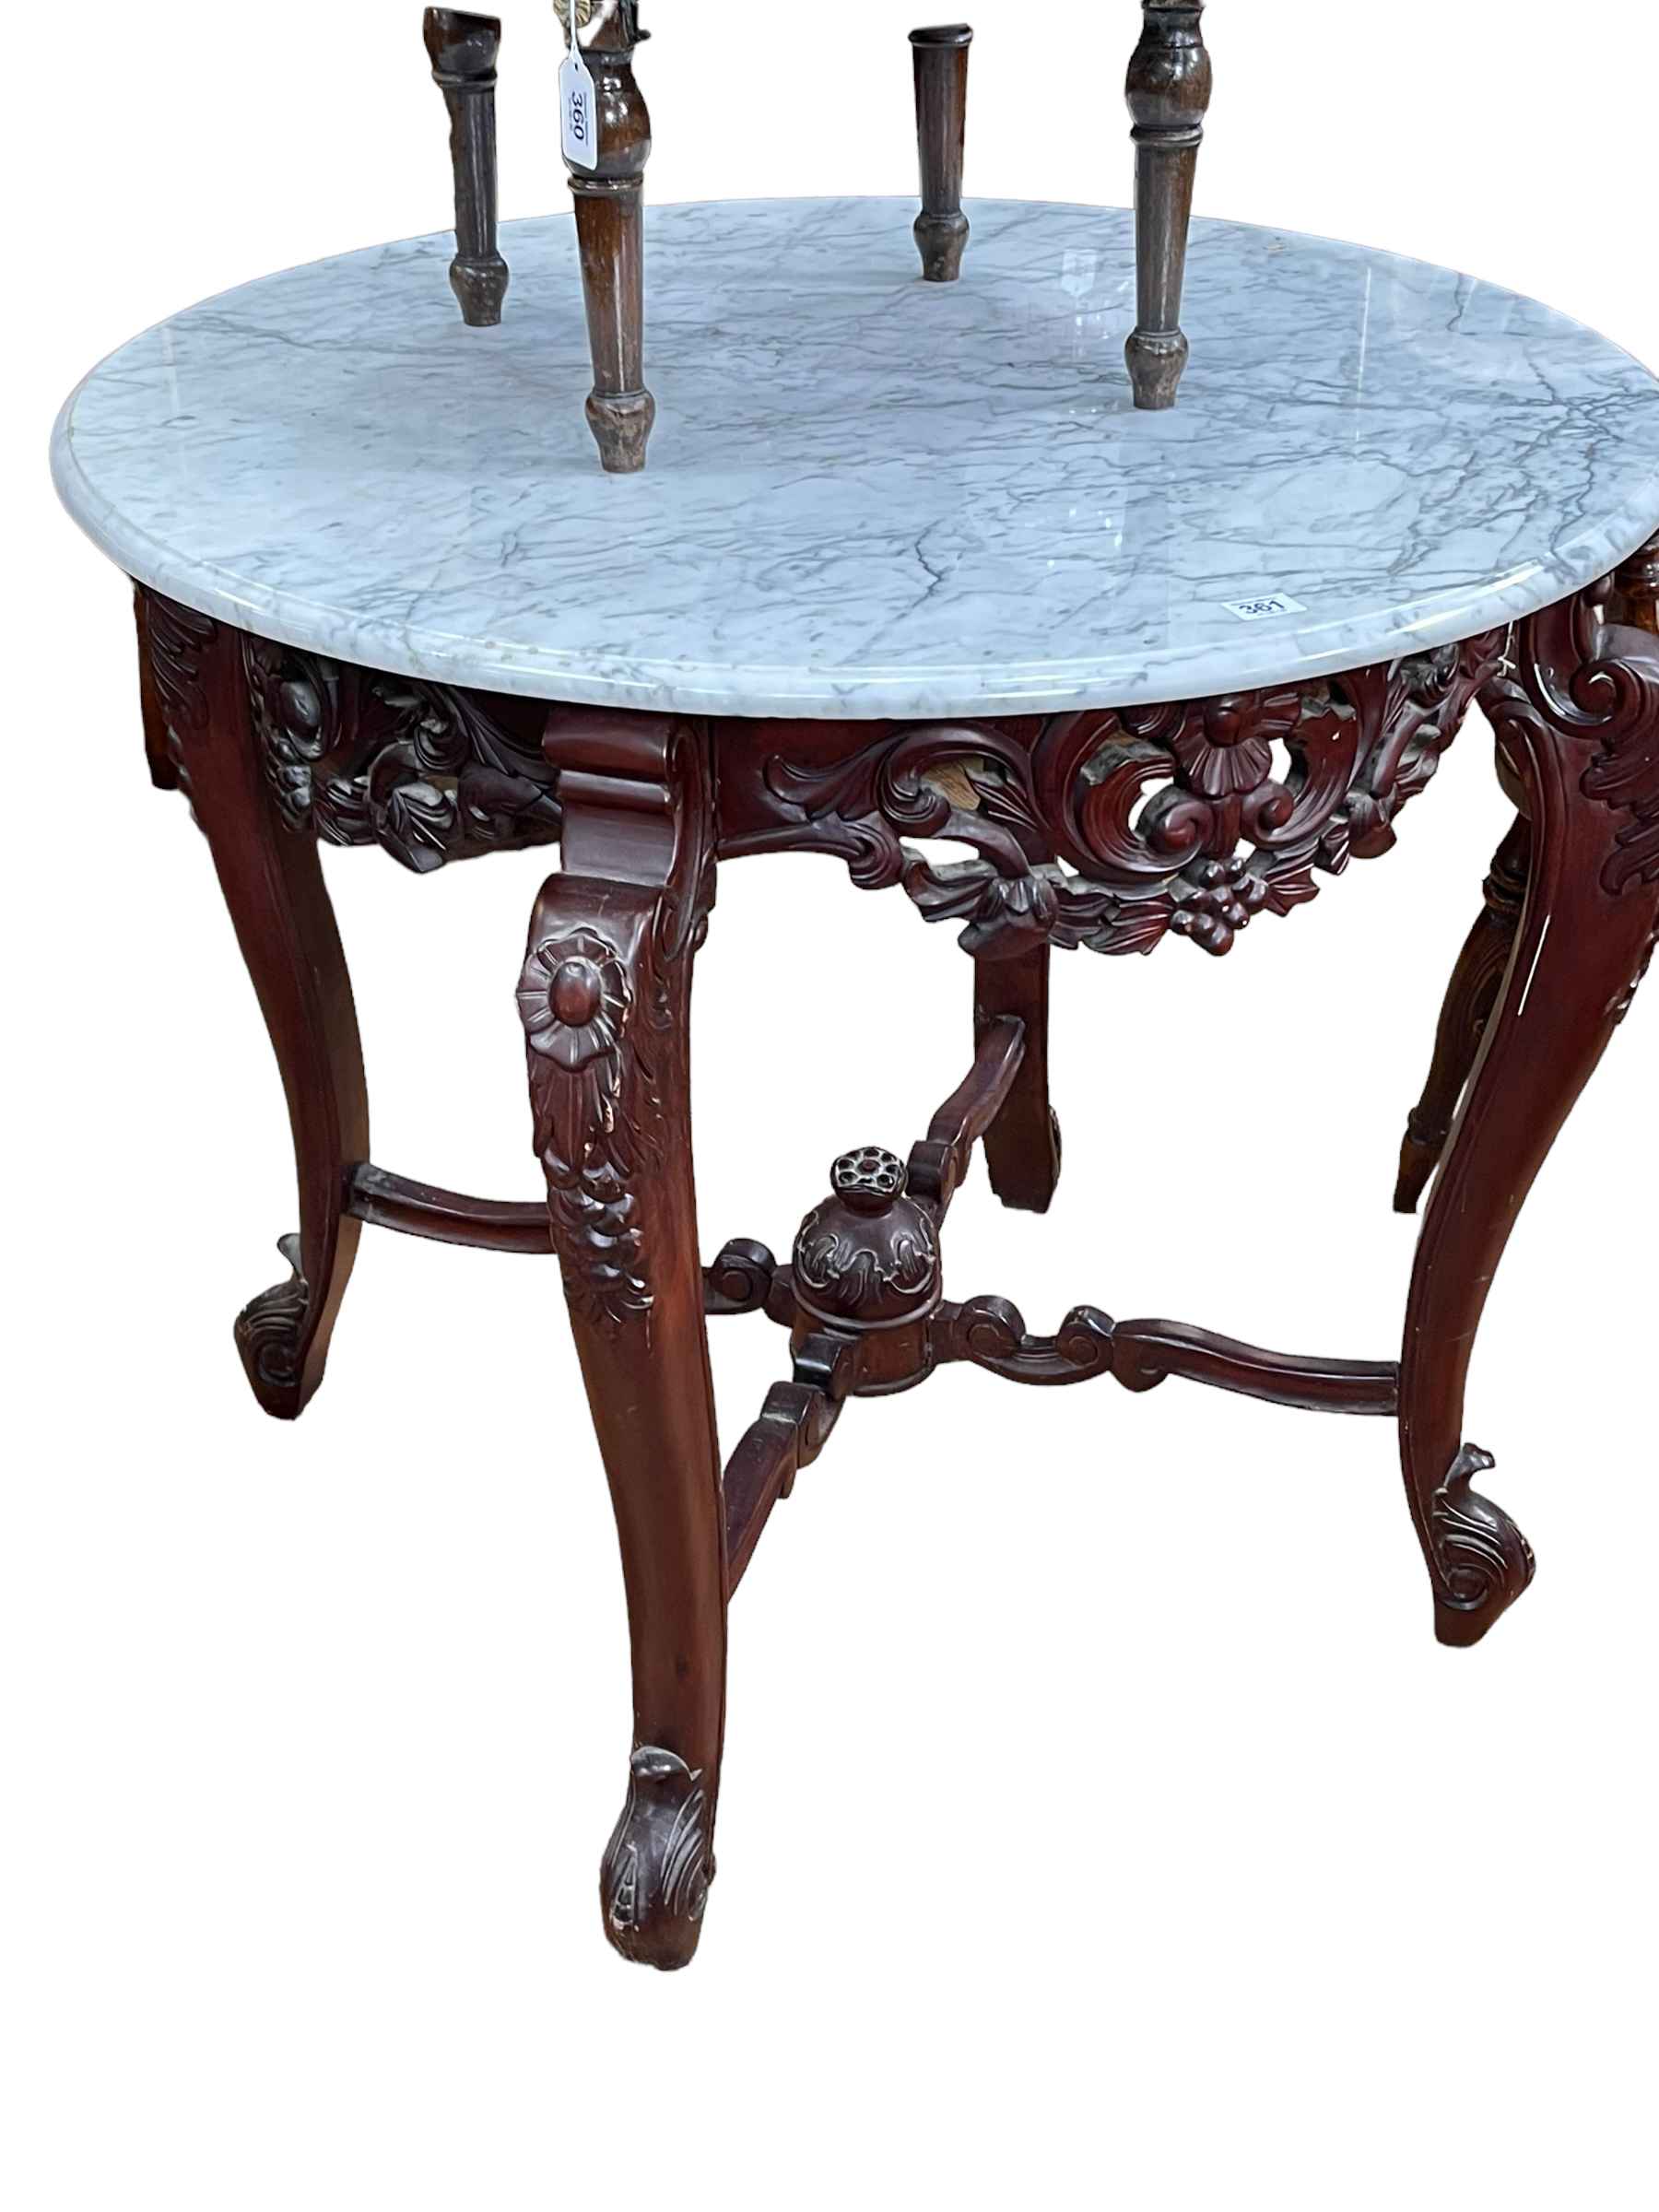 Circular marble topped centre table on carved polished wood base, 76.5cm by 86cm diameter.